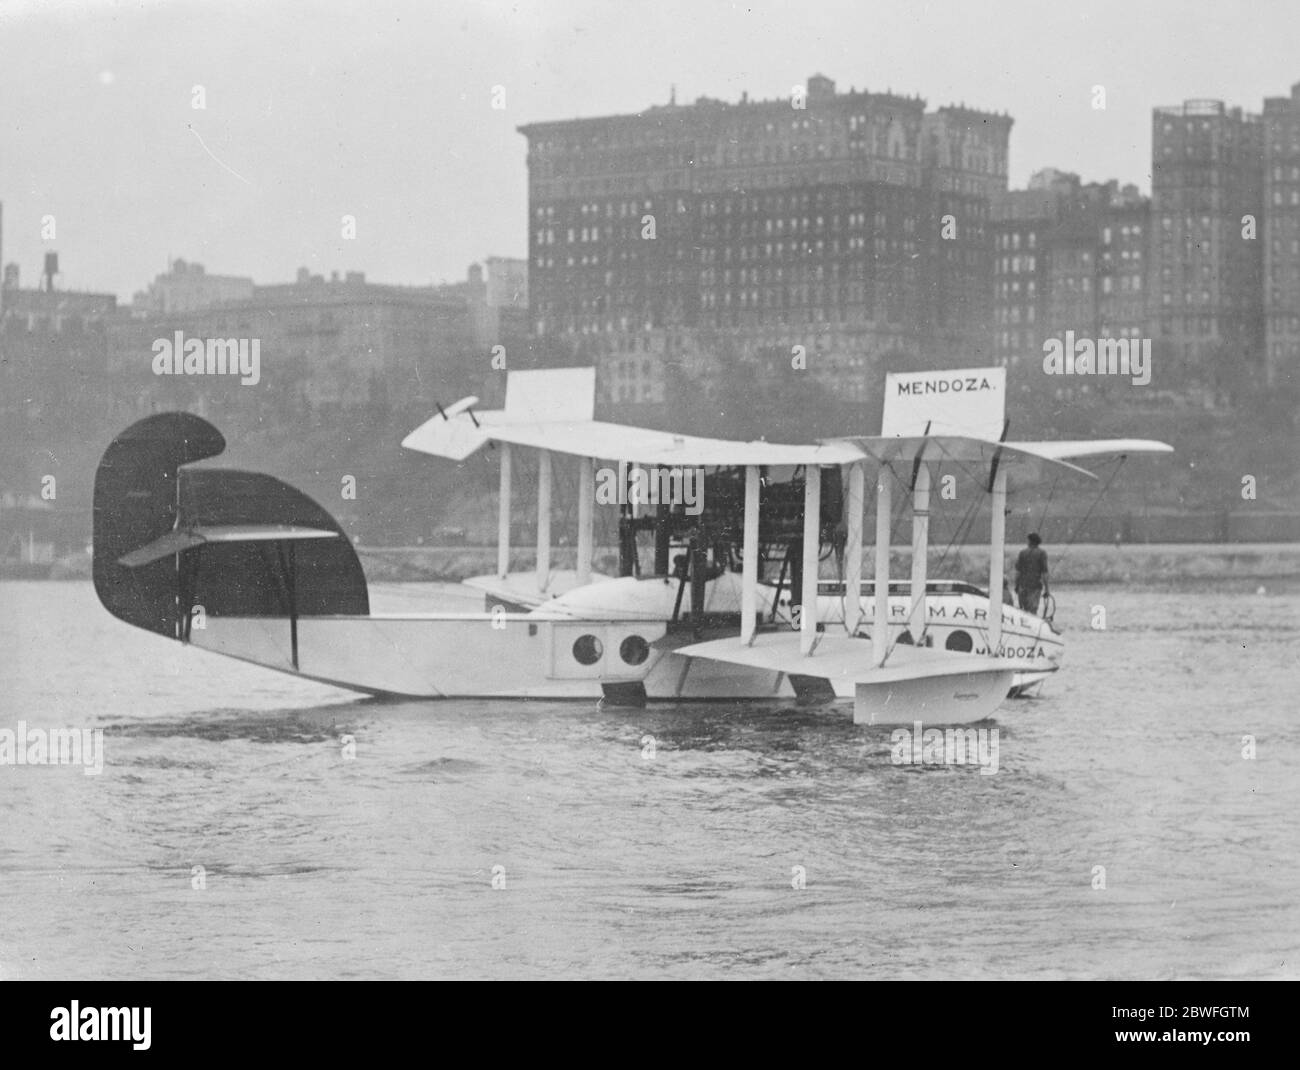 Flying Boat Carries 27 People The enclosed flying boat ' Mendoza ' which has just made a flight from Keyport , New Jersey , to the New York airport carrying 27 people this being the largest number ever carried in a commercial flying boat in the United States 3 June 1922 Stock Photo